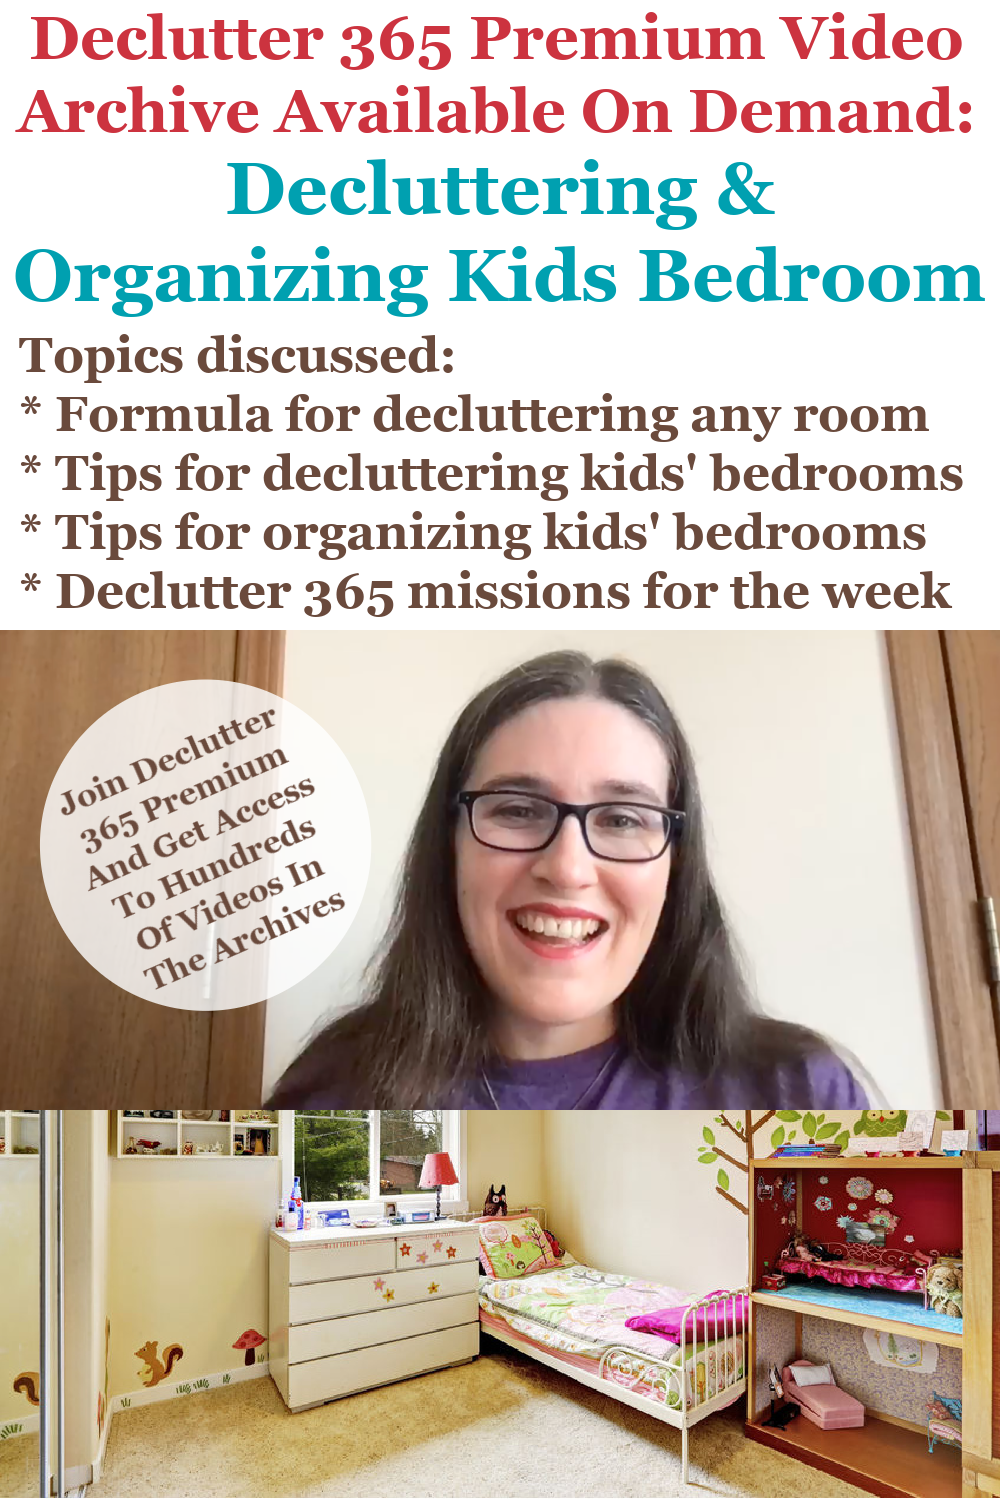 Organizing my kids' activity drawers  From Overwhelmed to Organized:  Organizing my kids' activity drawers